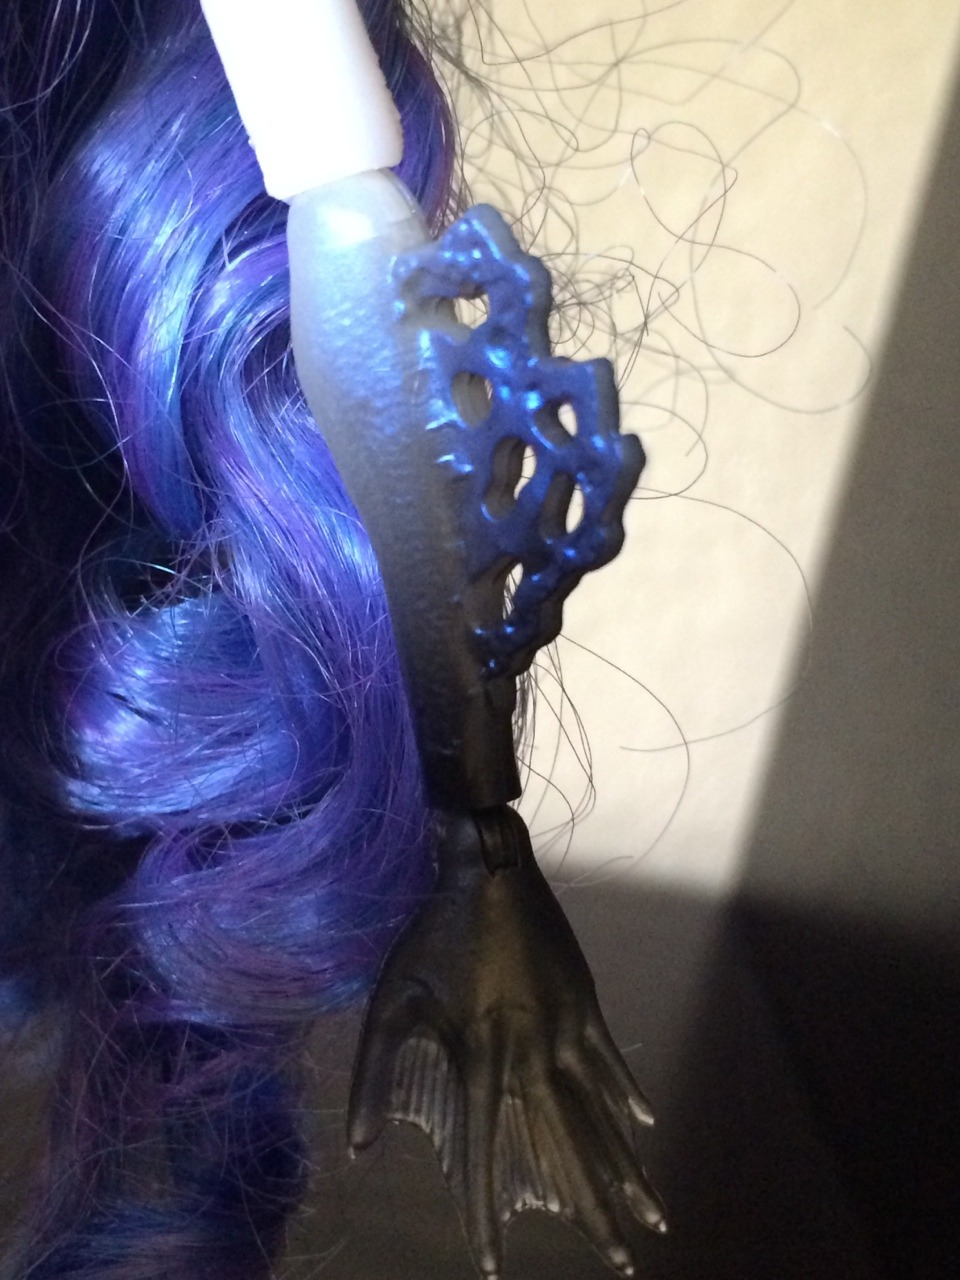 frozenmonsterhigh:

Sirena Von Boo details pictures. She is a very detailed doll, and i’m surprised to see her “Ghost Fin” in her back. And also the details in her tail, she has little stars.